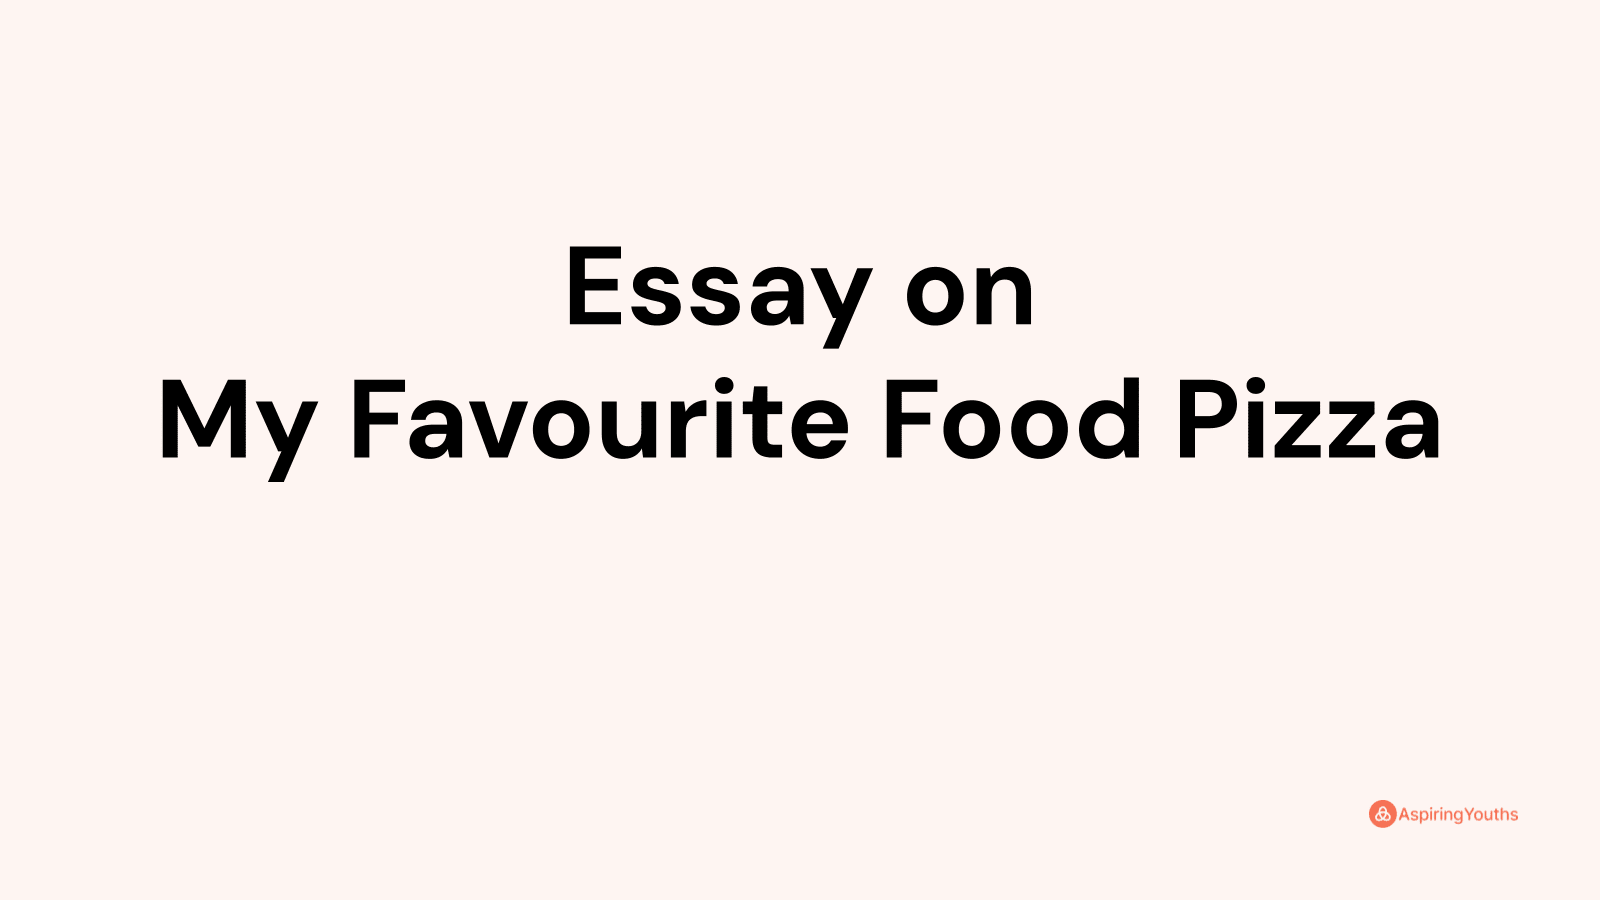 Essay on My Favourite Food Pizza